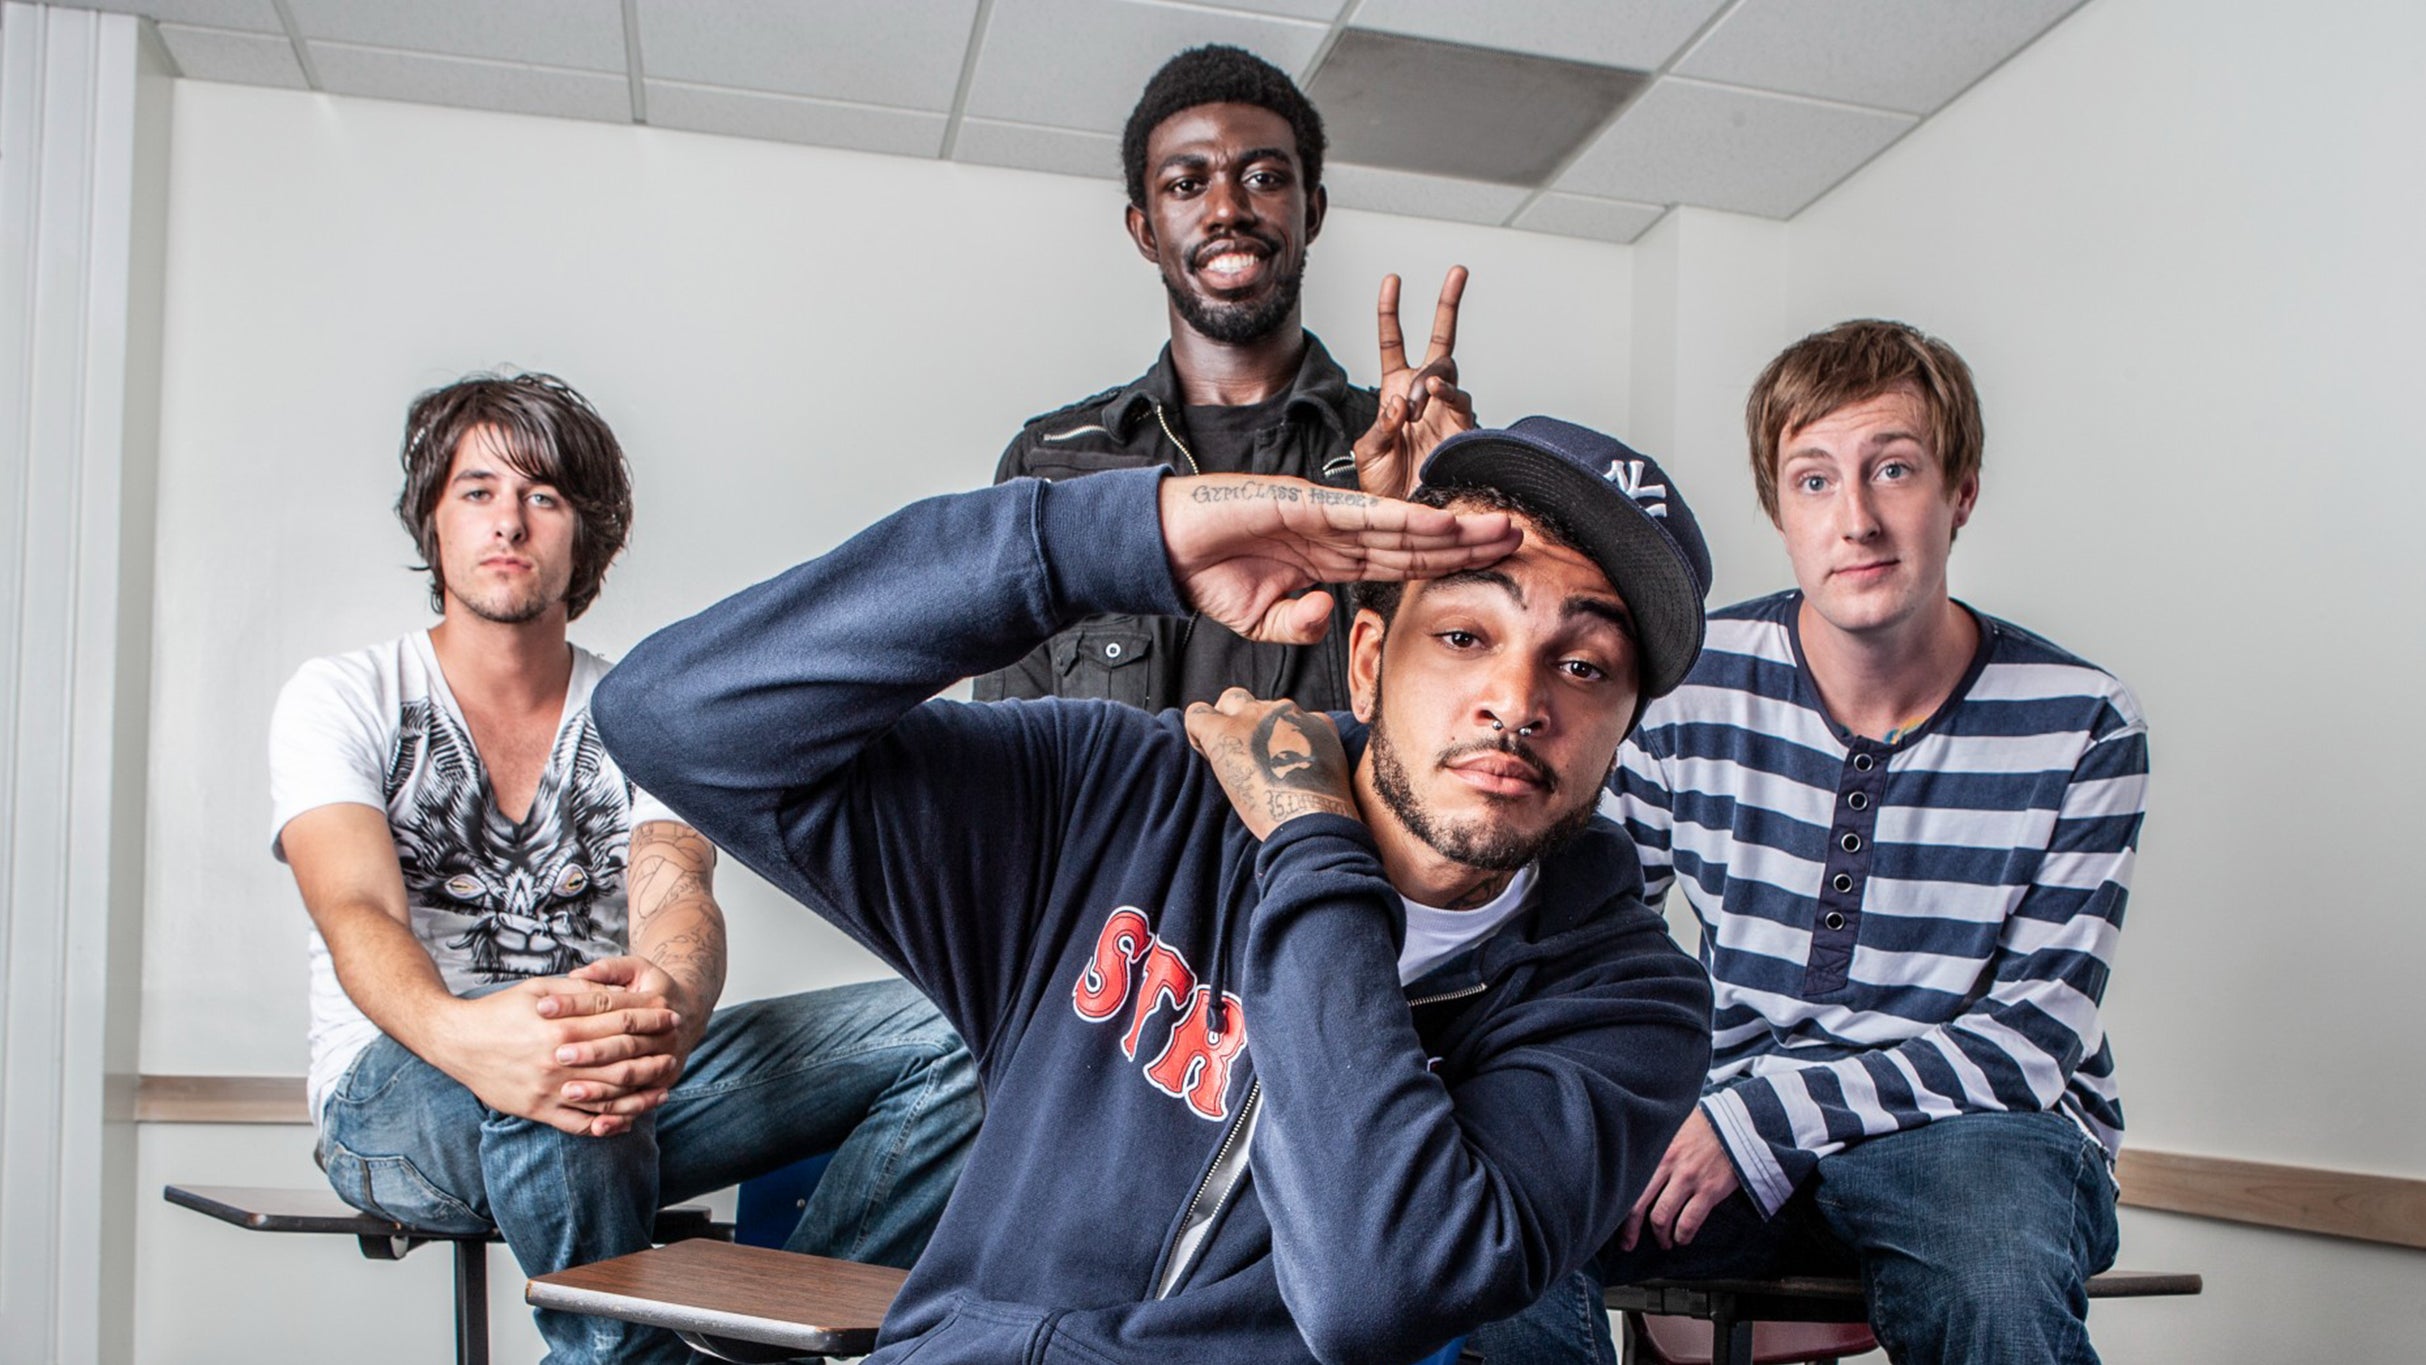 Gym Class Heroes in Auckland promo photo for Frontier presale offer code